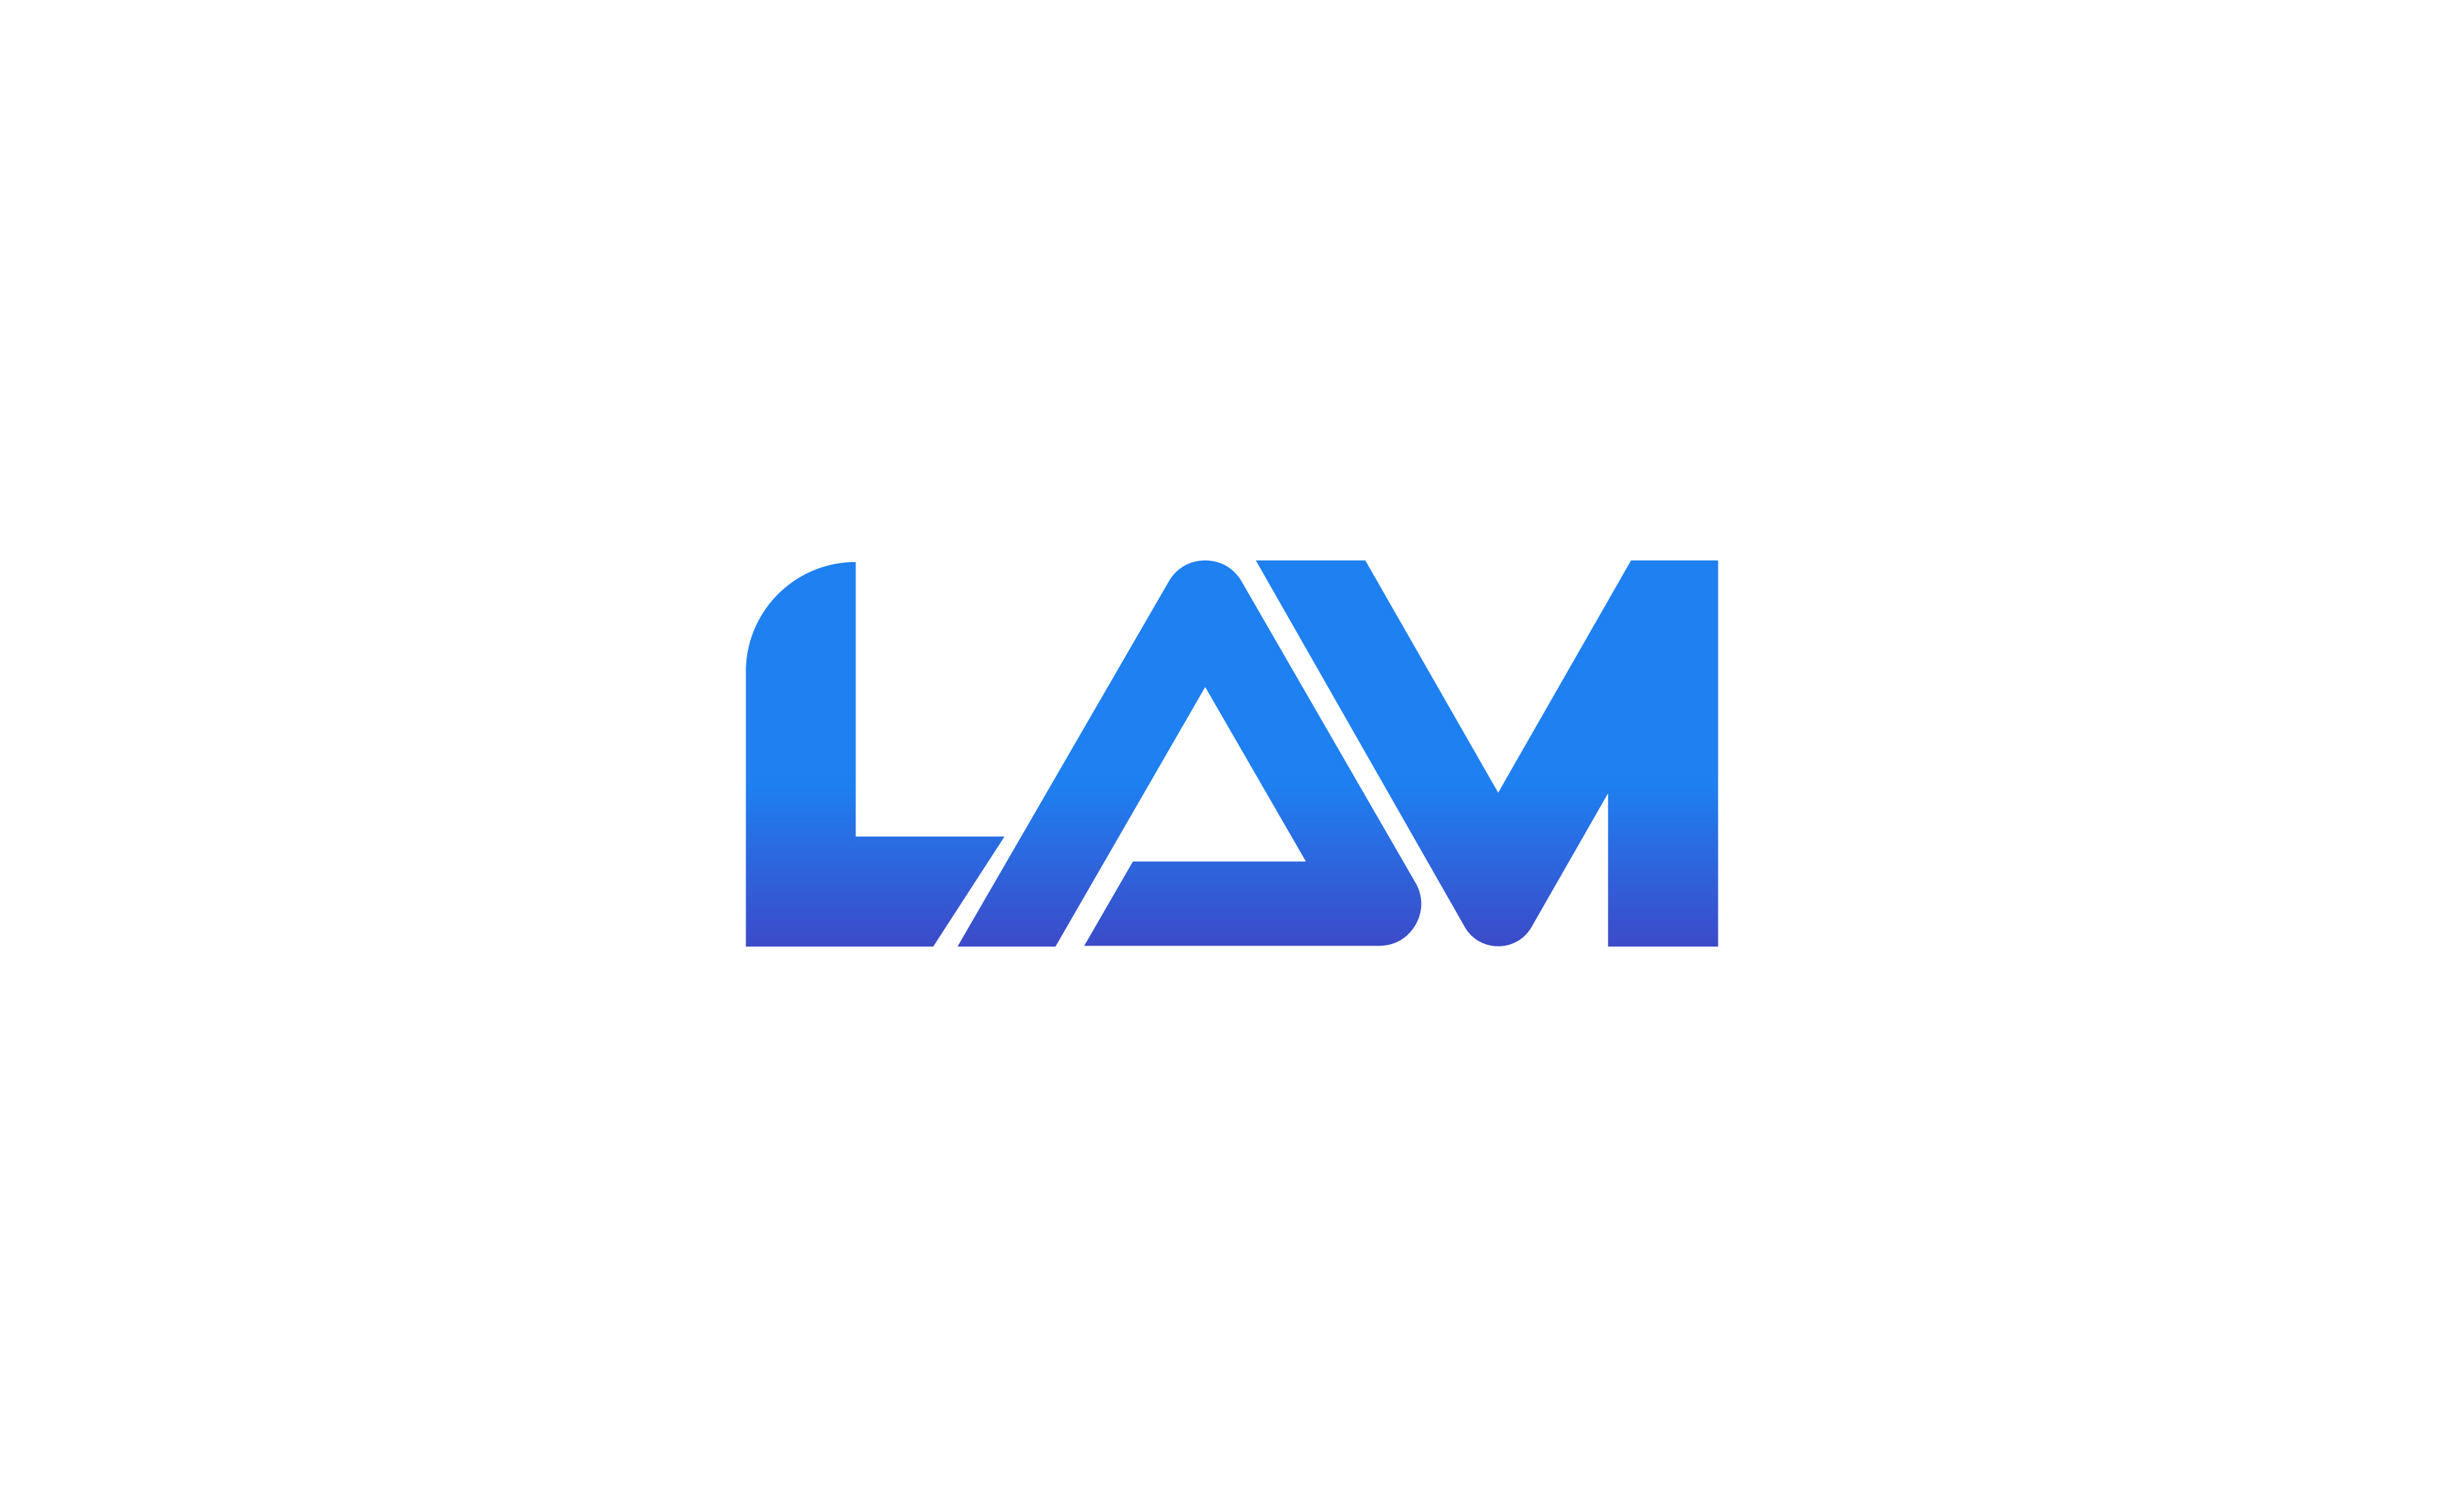 With its white-label crypto-to-fiat debit card solution for businesses, LAM Holdings expands throughout the EEA.